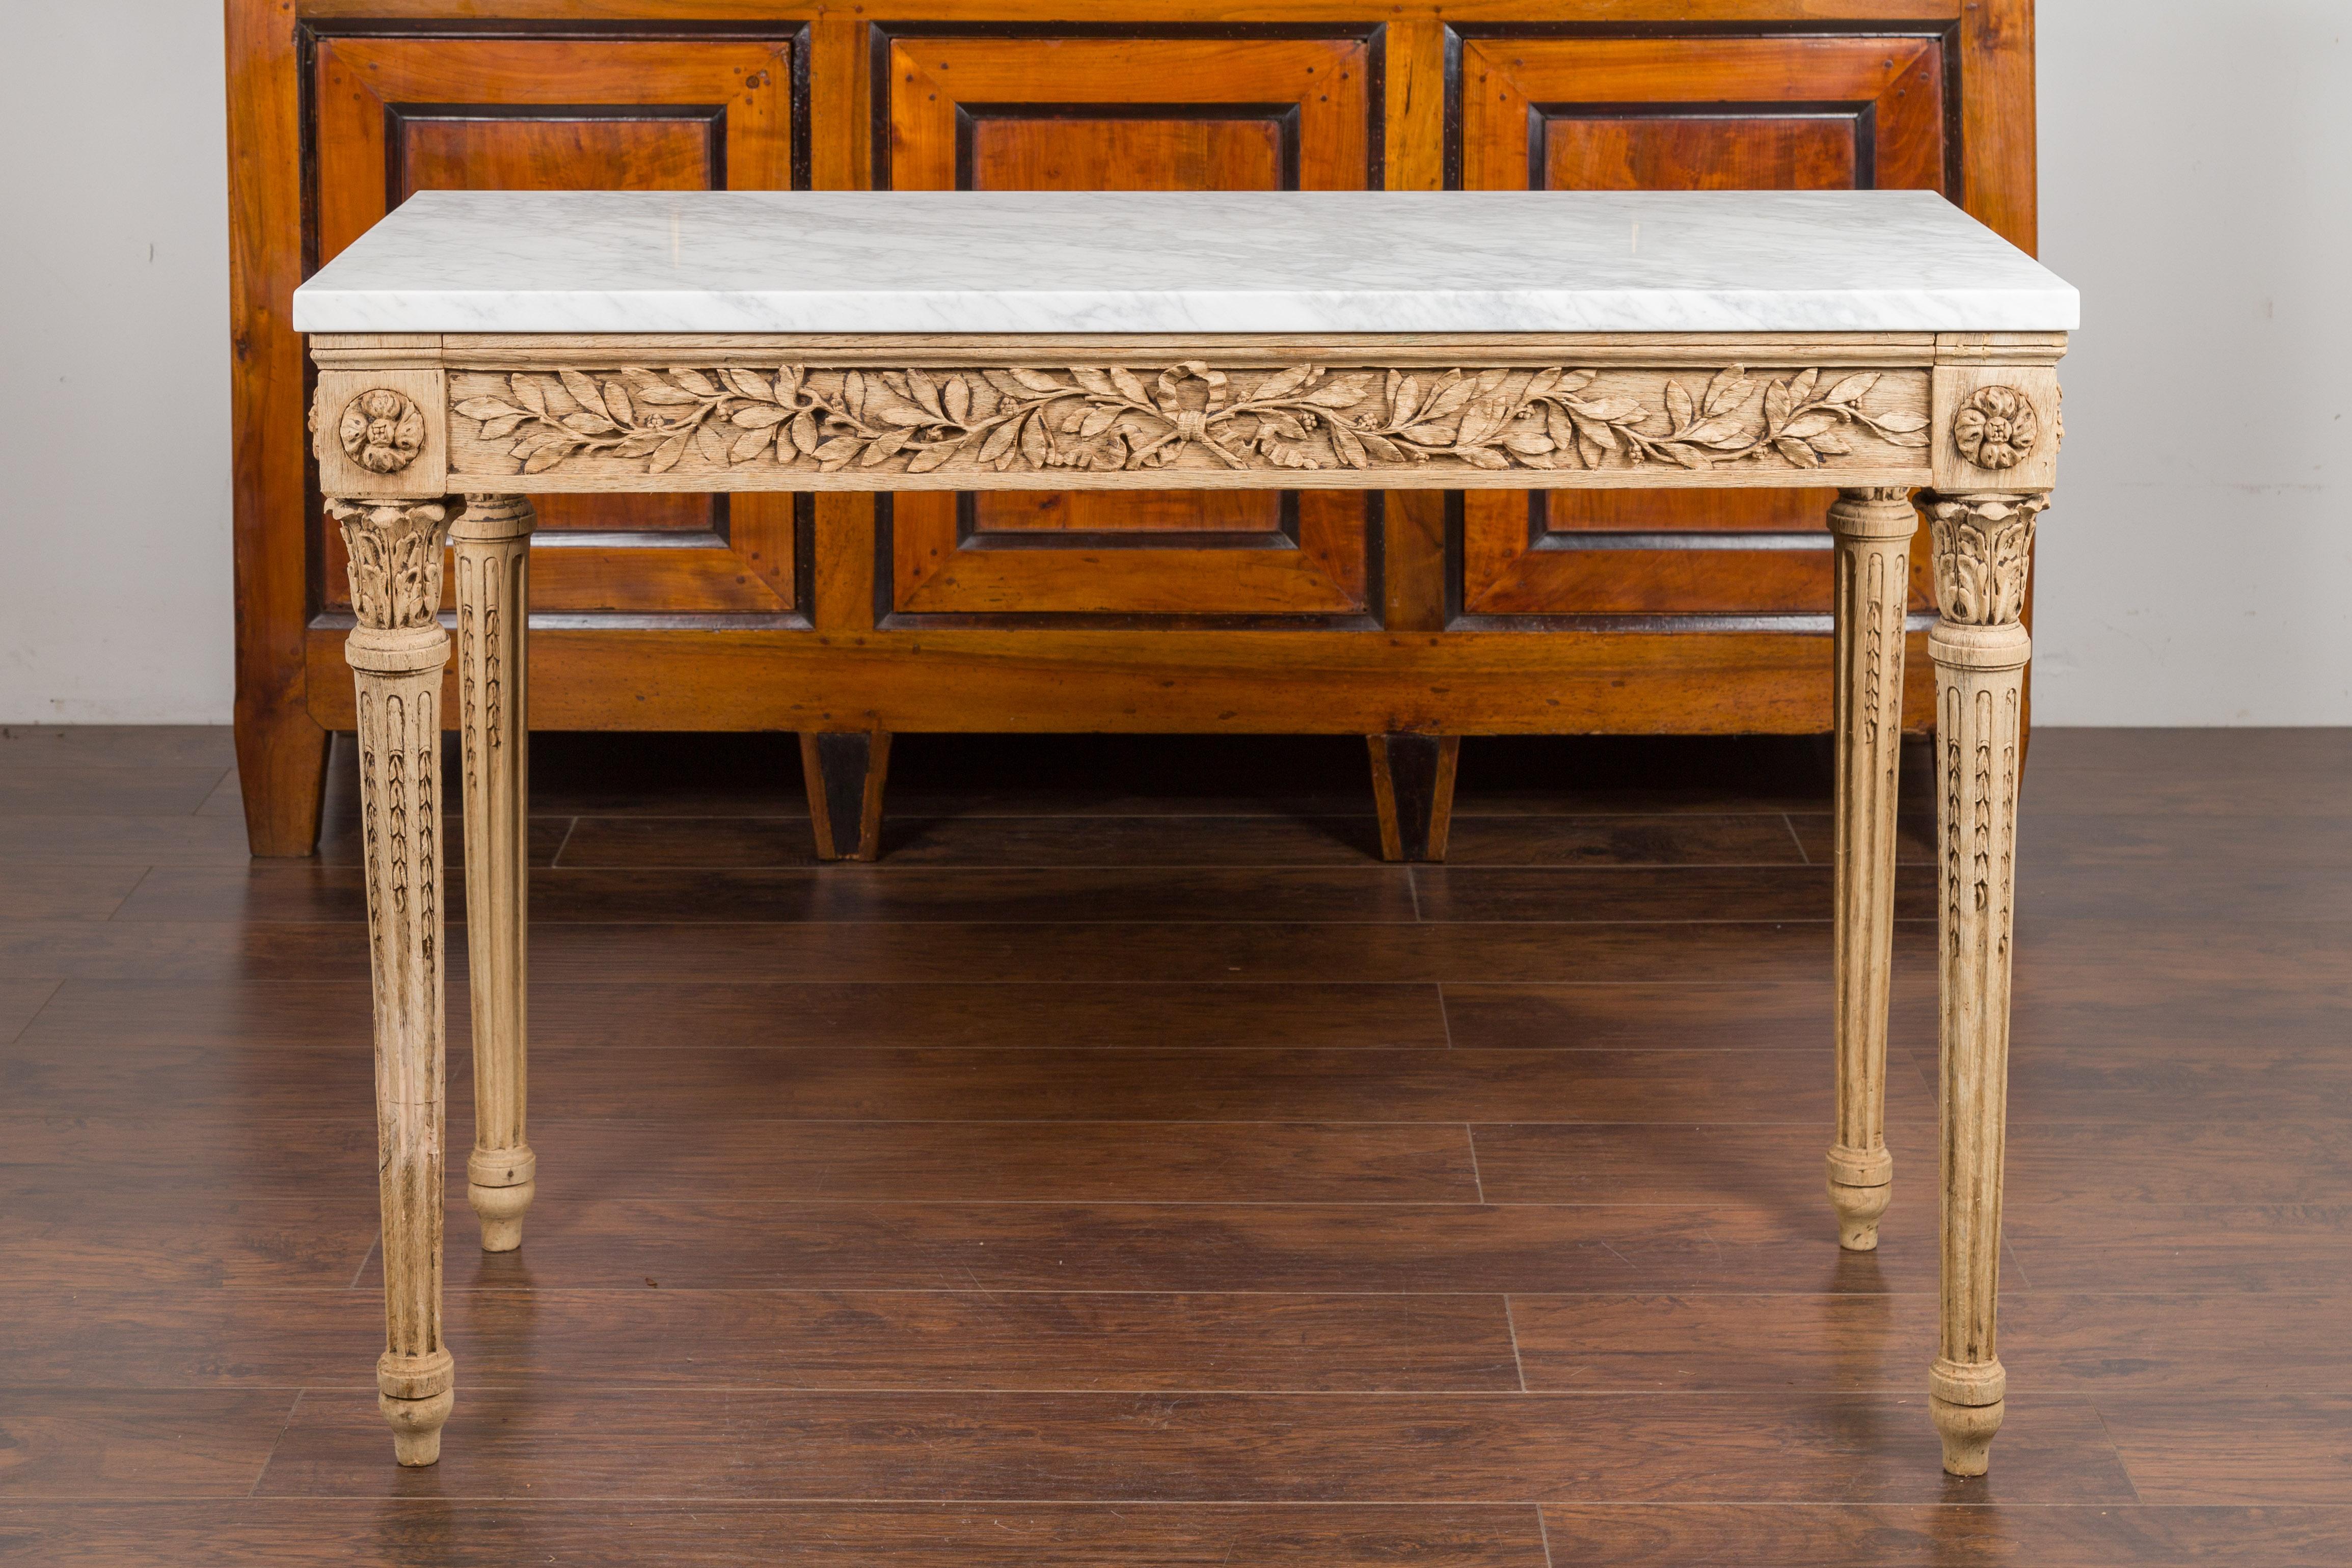 A French Napoléon III period carved and bleached console table from the late 19th century, with white marble top. Created in France at the end of Emperor Napoléon III's reign, this console table captures our attention with its richly carved décor